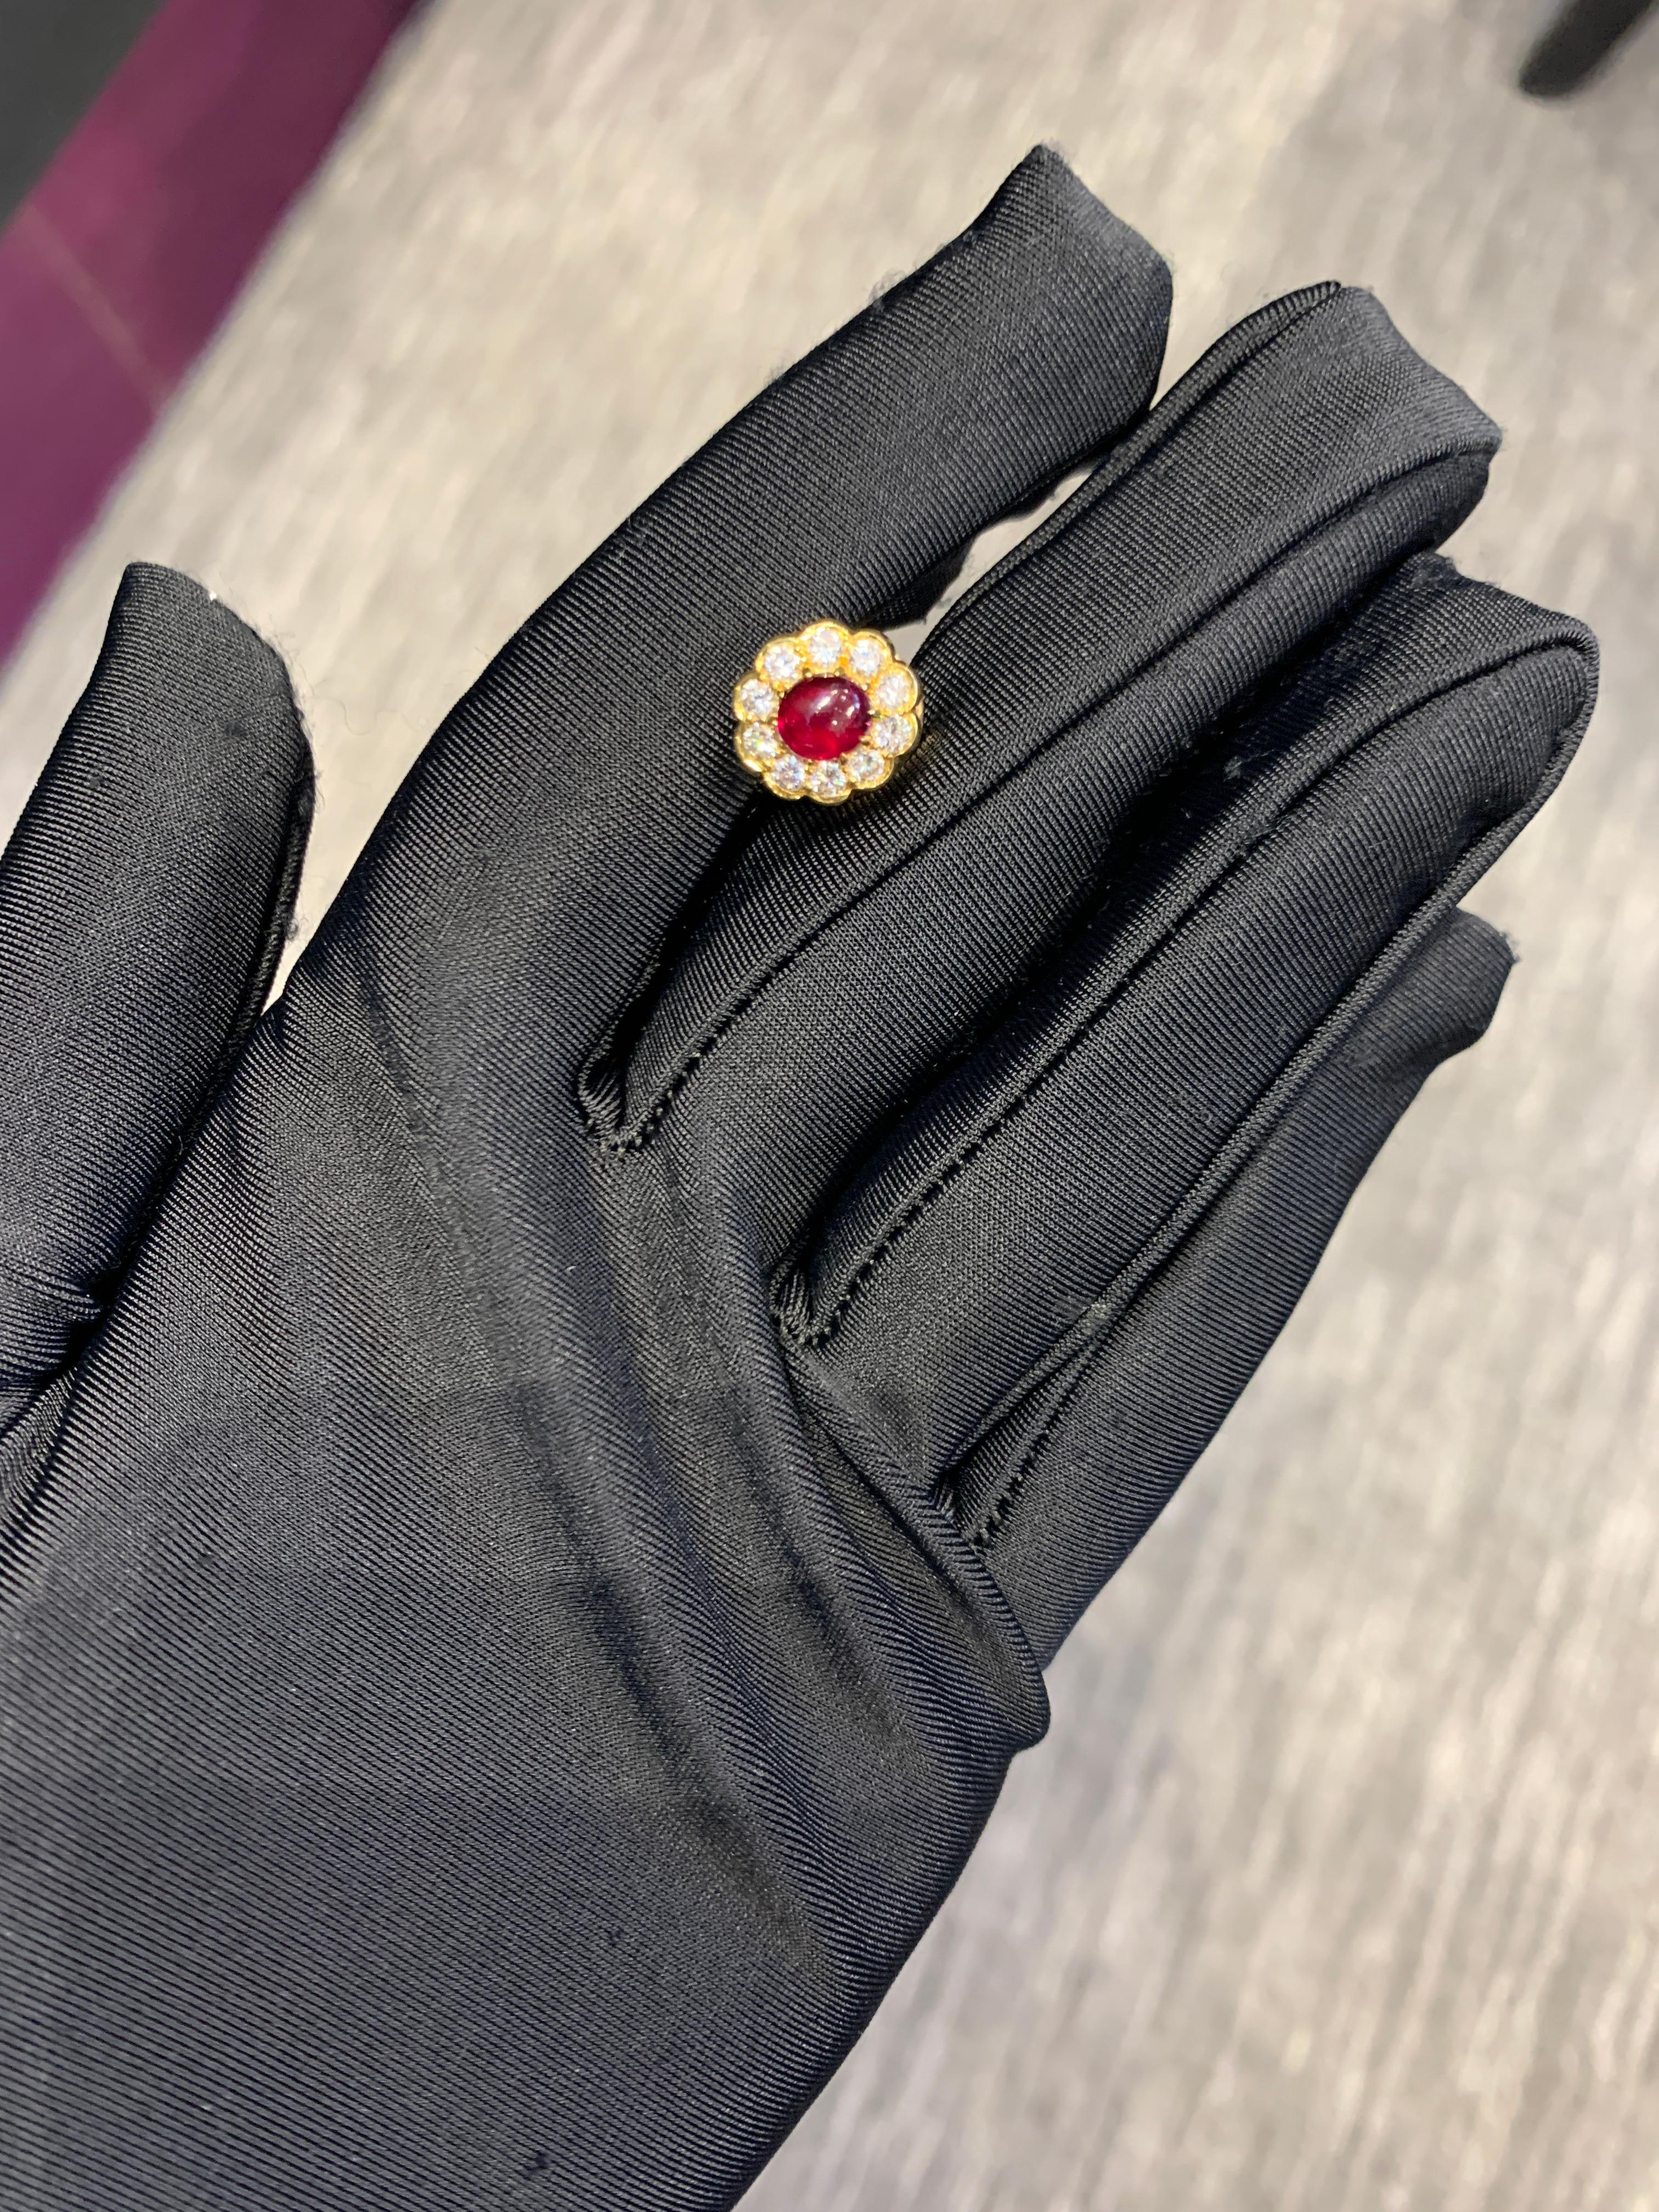 Van Cleef and Arpels Ruby and Diamond Tie Pin

Beautiful Van Cleef and Arpels tie pin with ten round cut diamonds and cabochon ruby. 

Signed: VCA and numbered

Metal Type: 18 karat yellow gold

Approximate Length: .5 inch